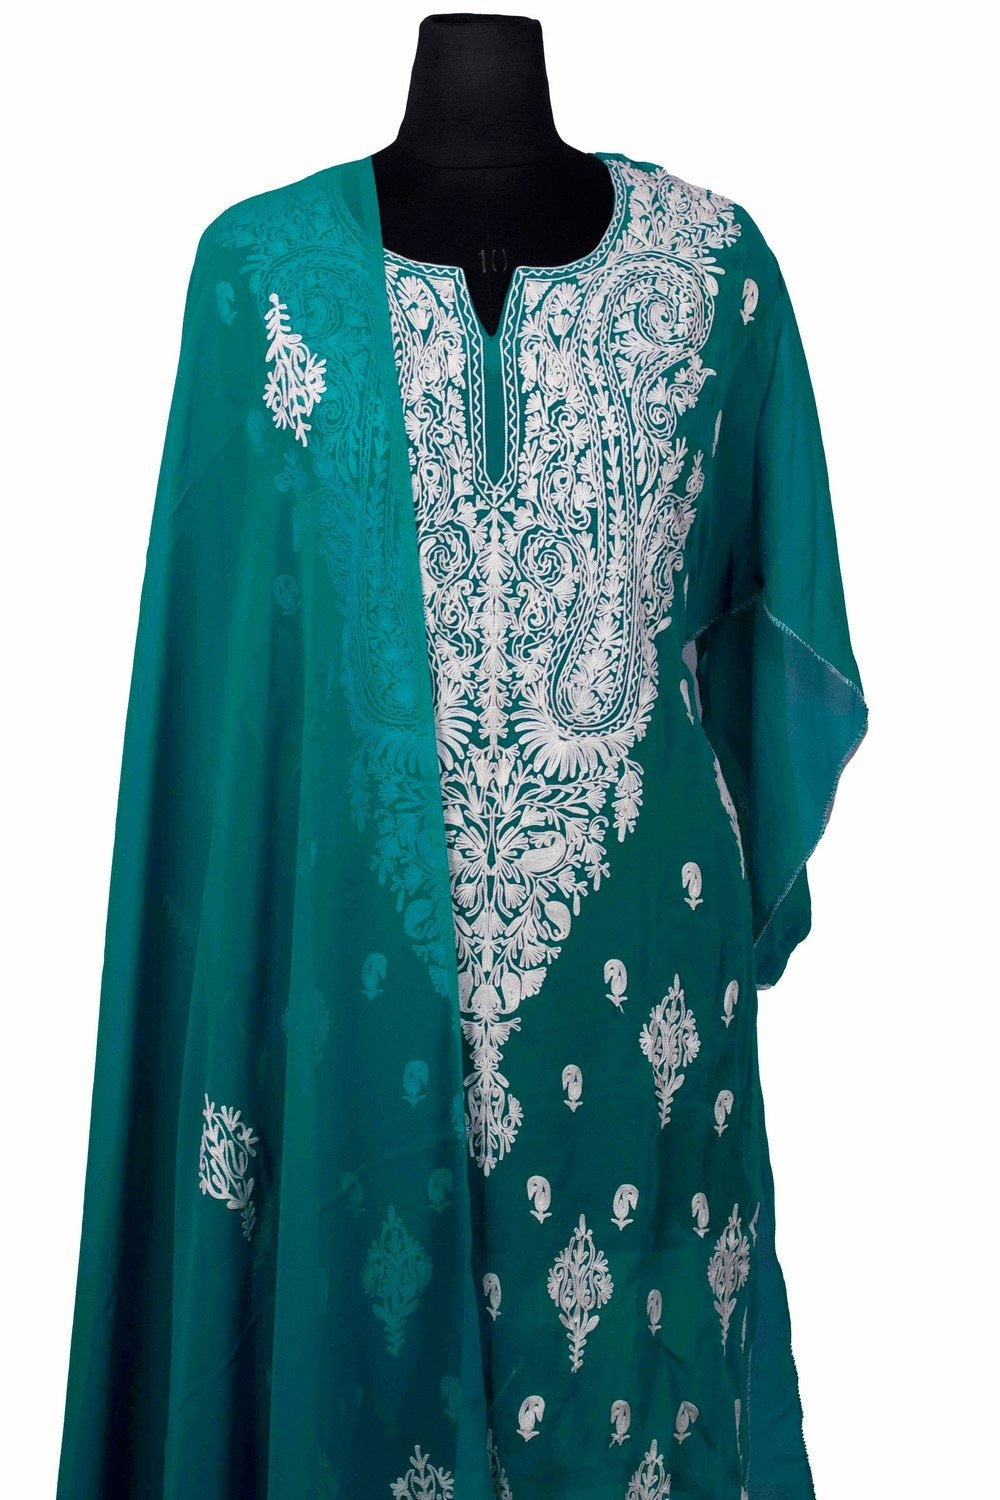 Green Colour Aari Work Kurti With Long Neck Embroidery Along